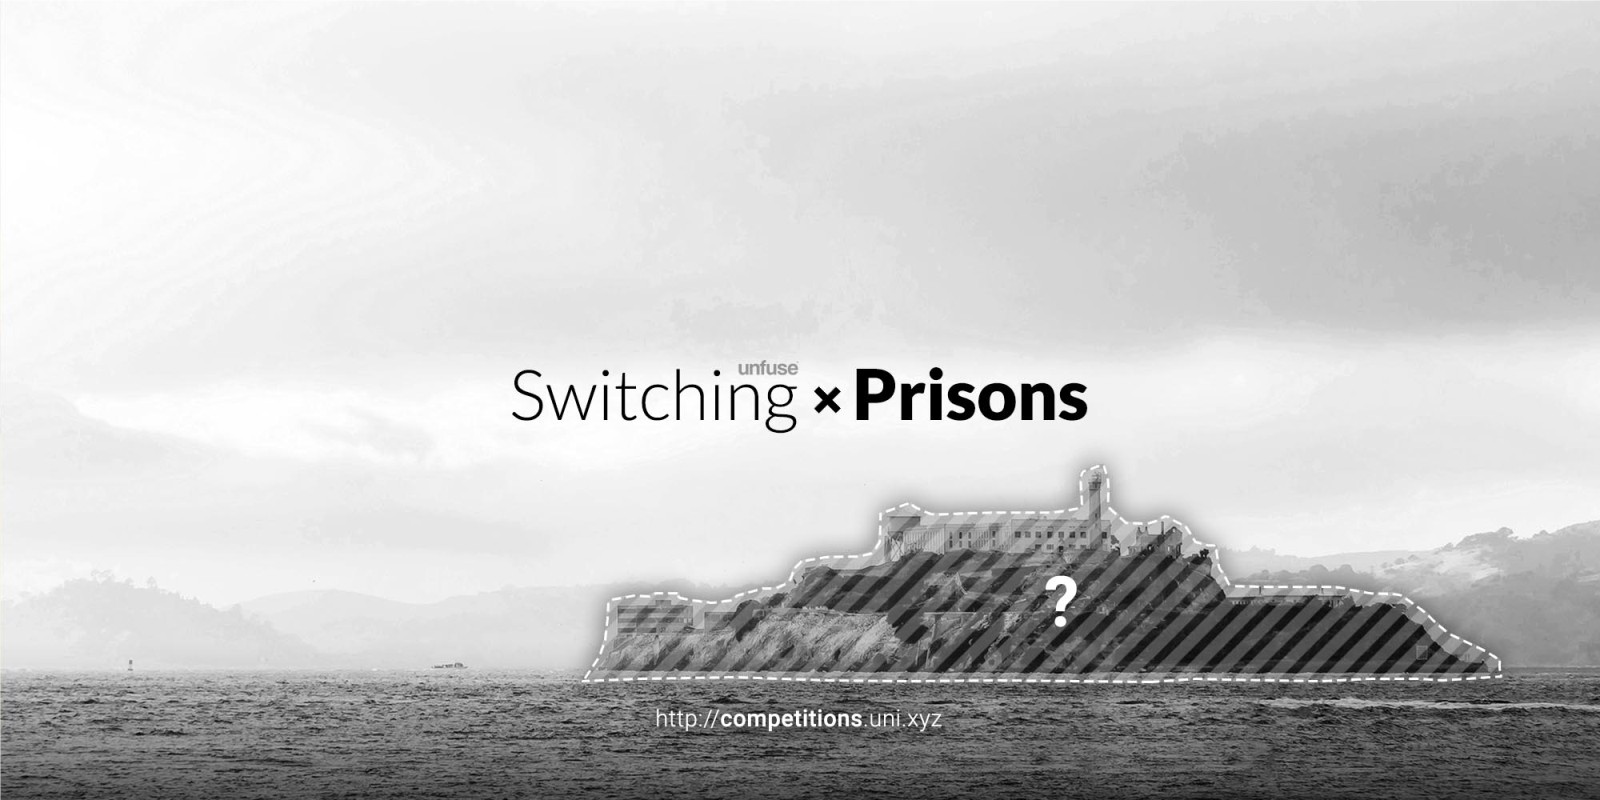 Switching prisons